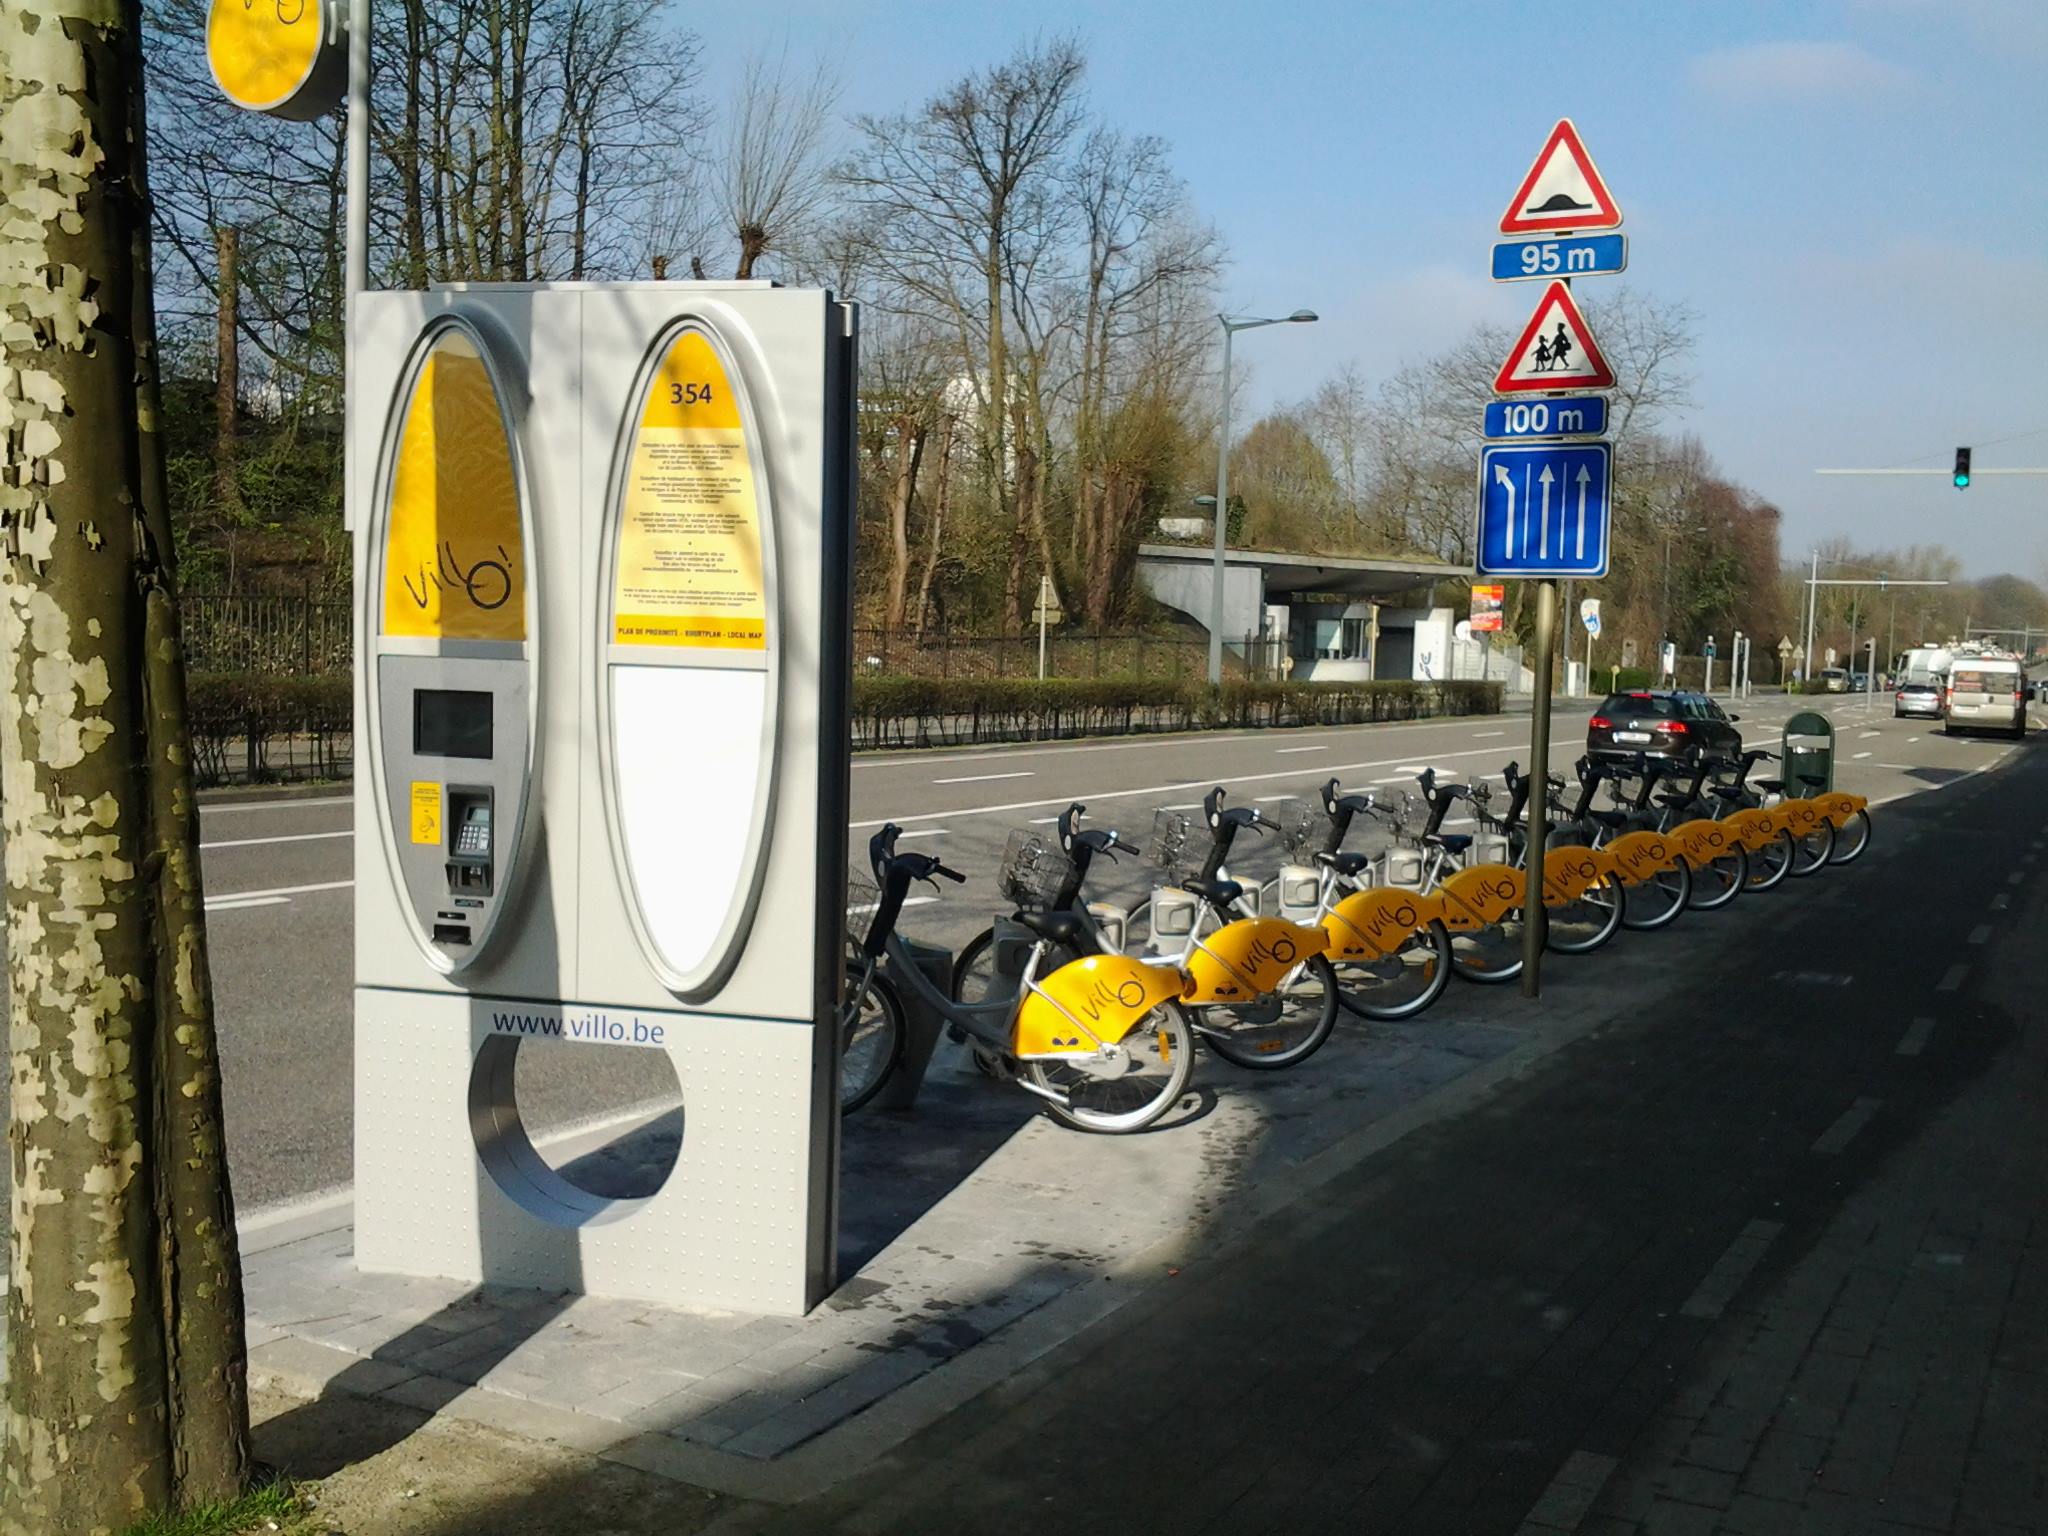 Prepaid E-Bikes and Parking in Brussels, Belgium